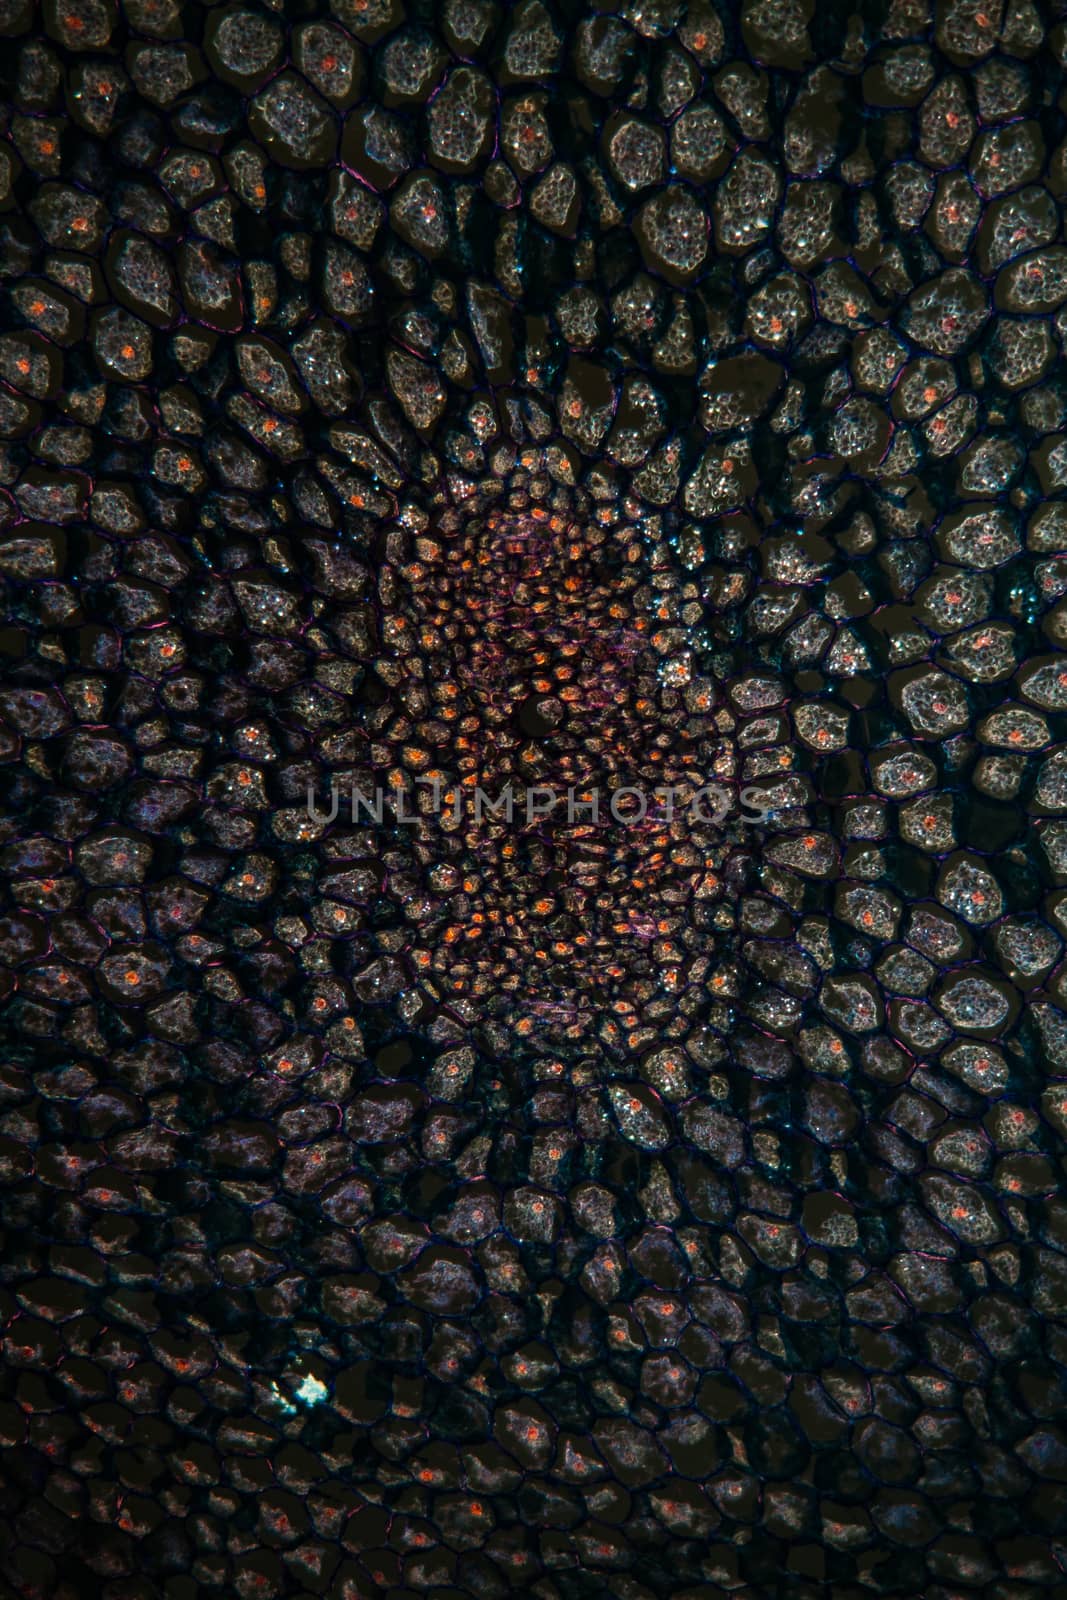 Lesser celandine root in cross section 100x by Dr-Lange